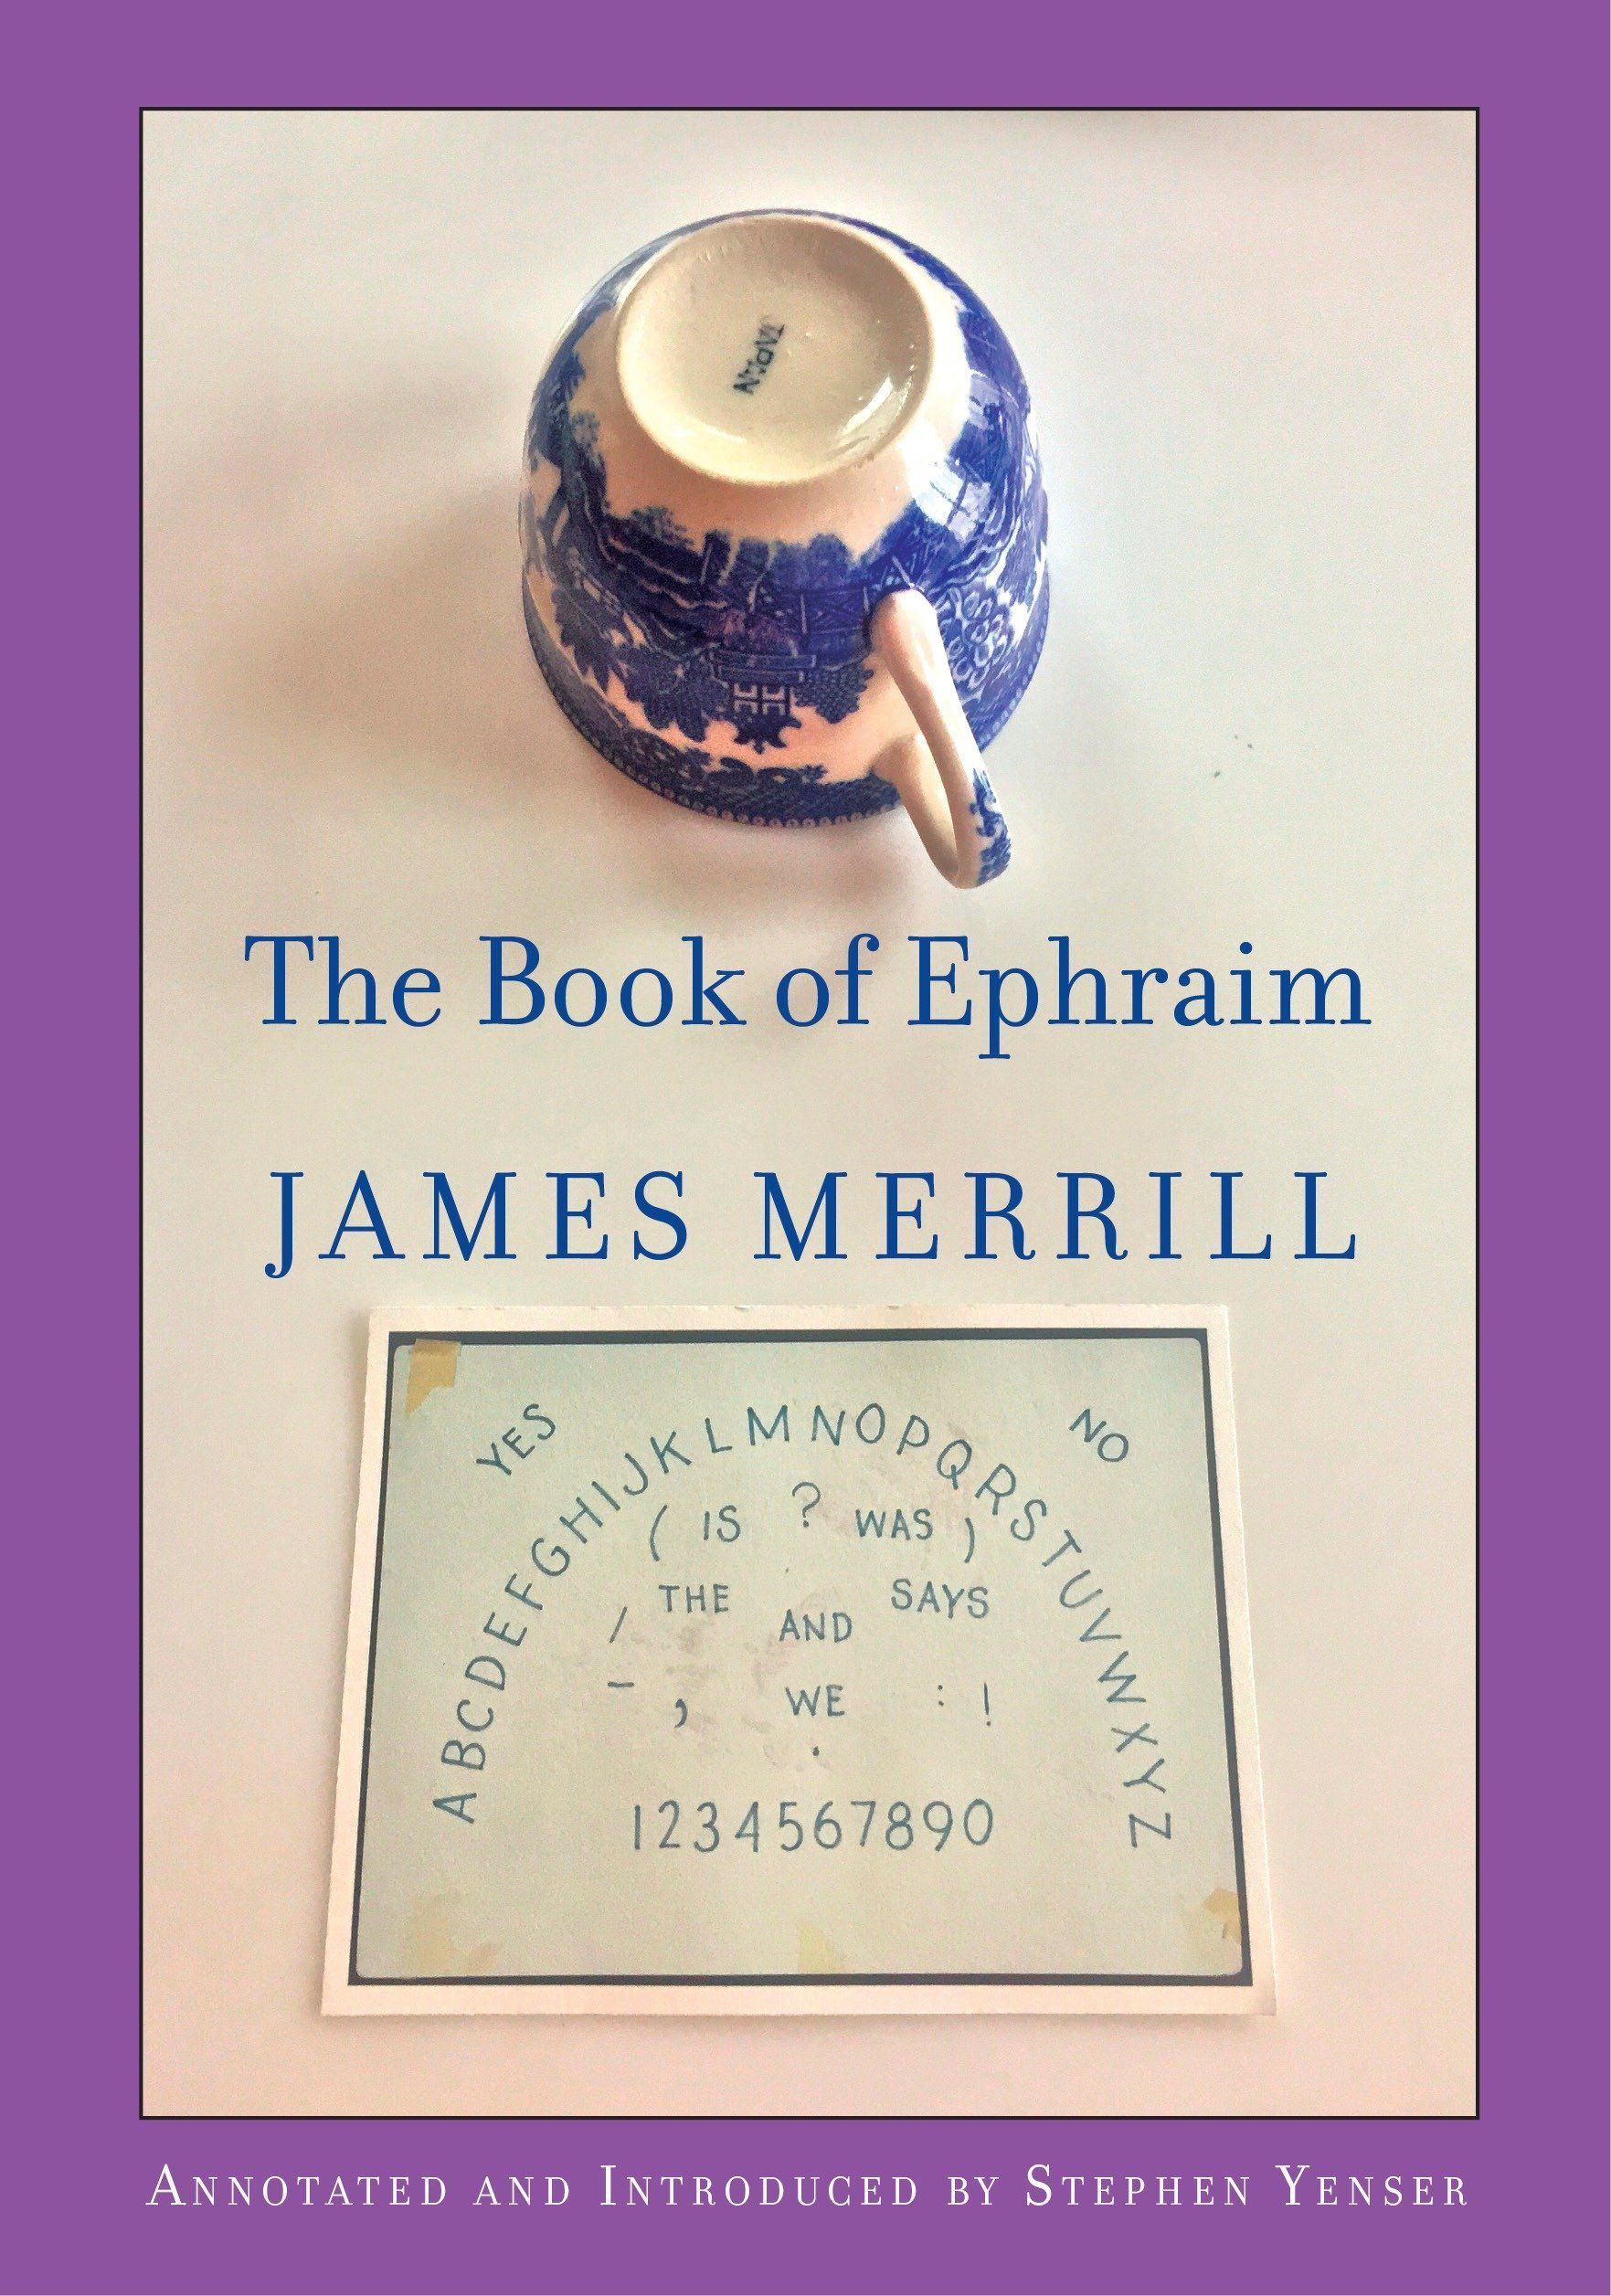 Clever Ghosts: James Merrill’s “The Book of Ephraim”